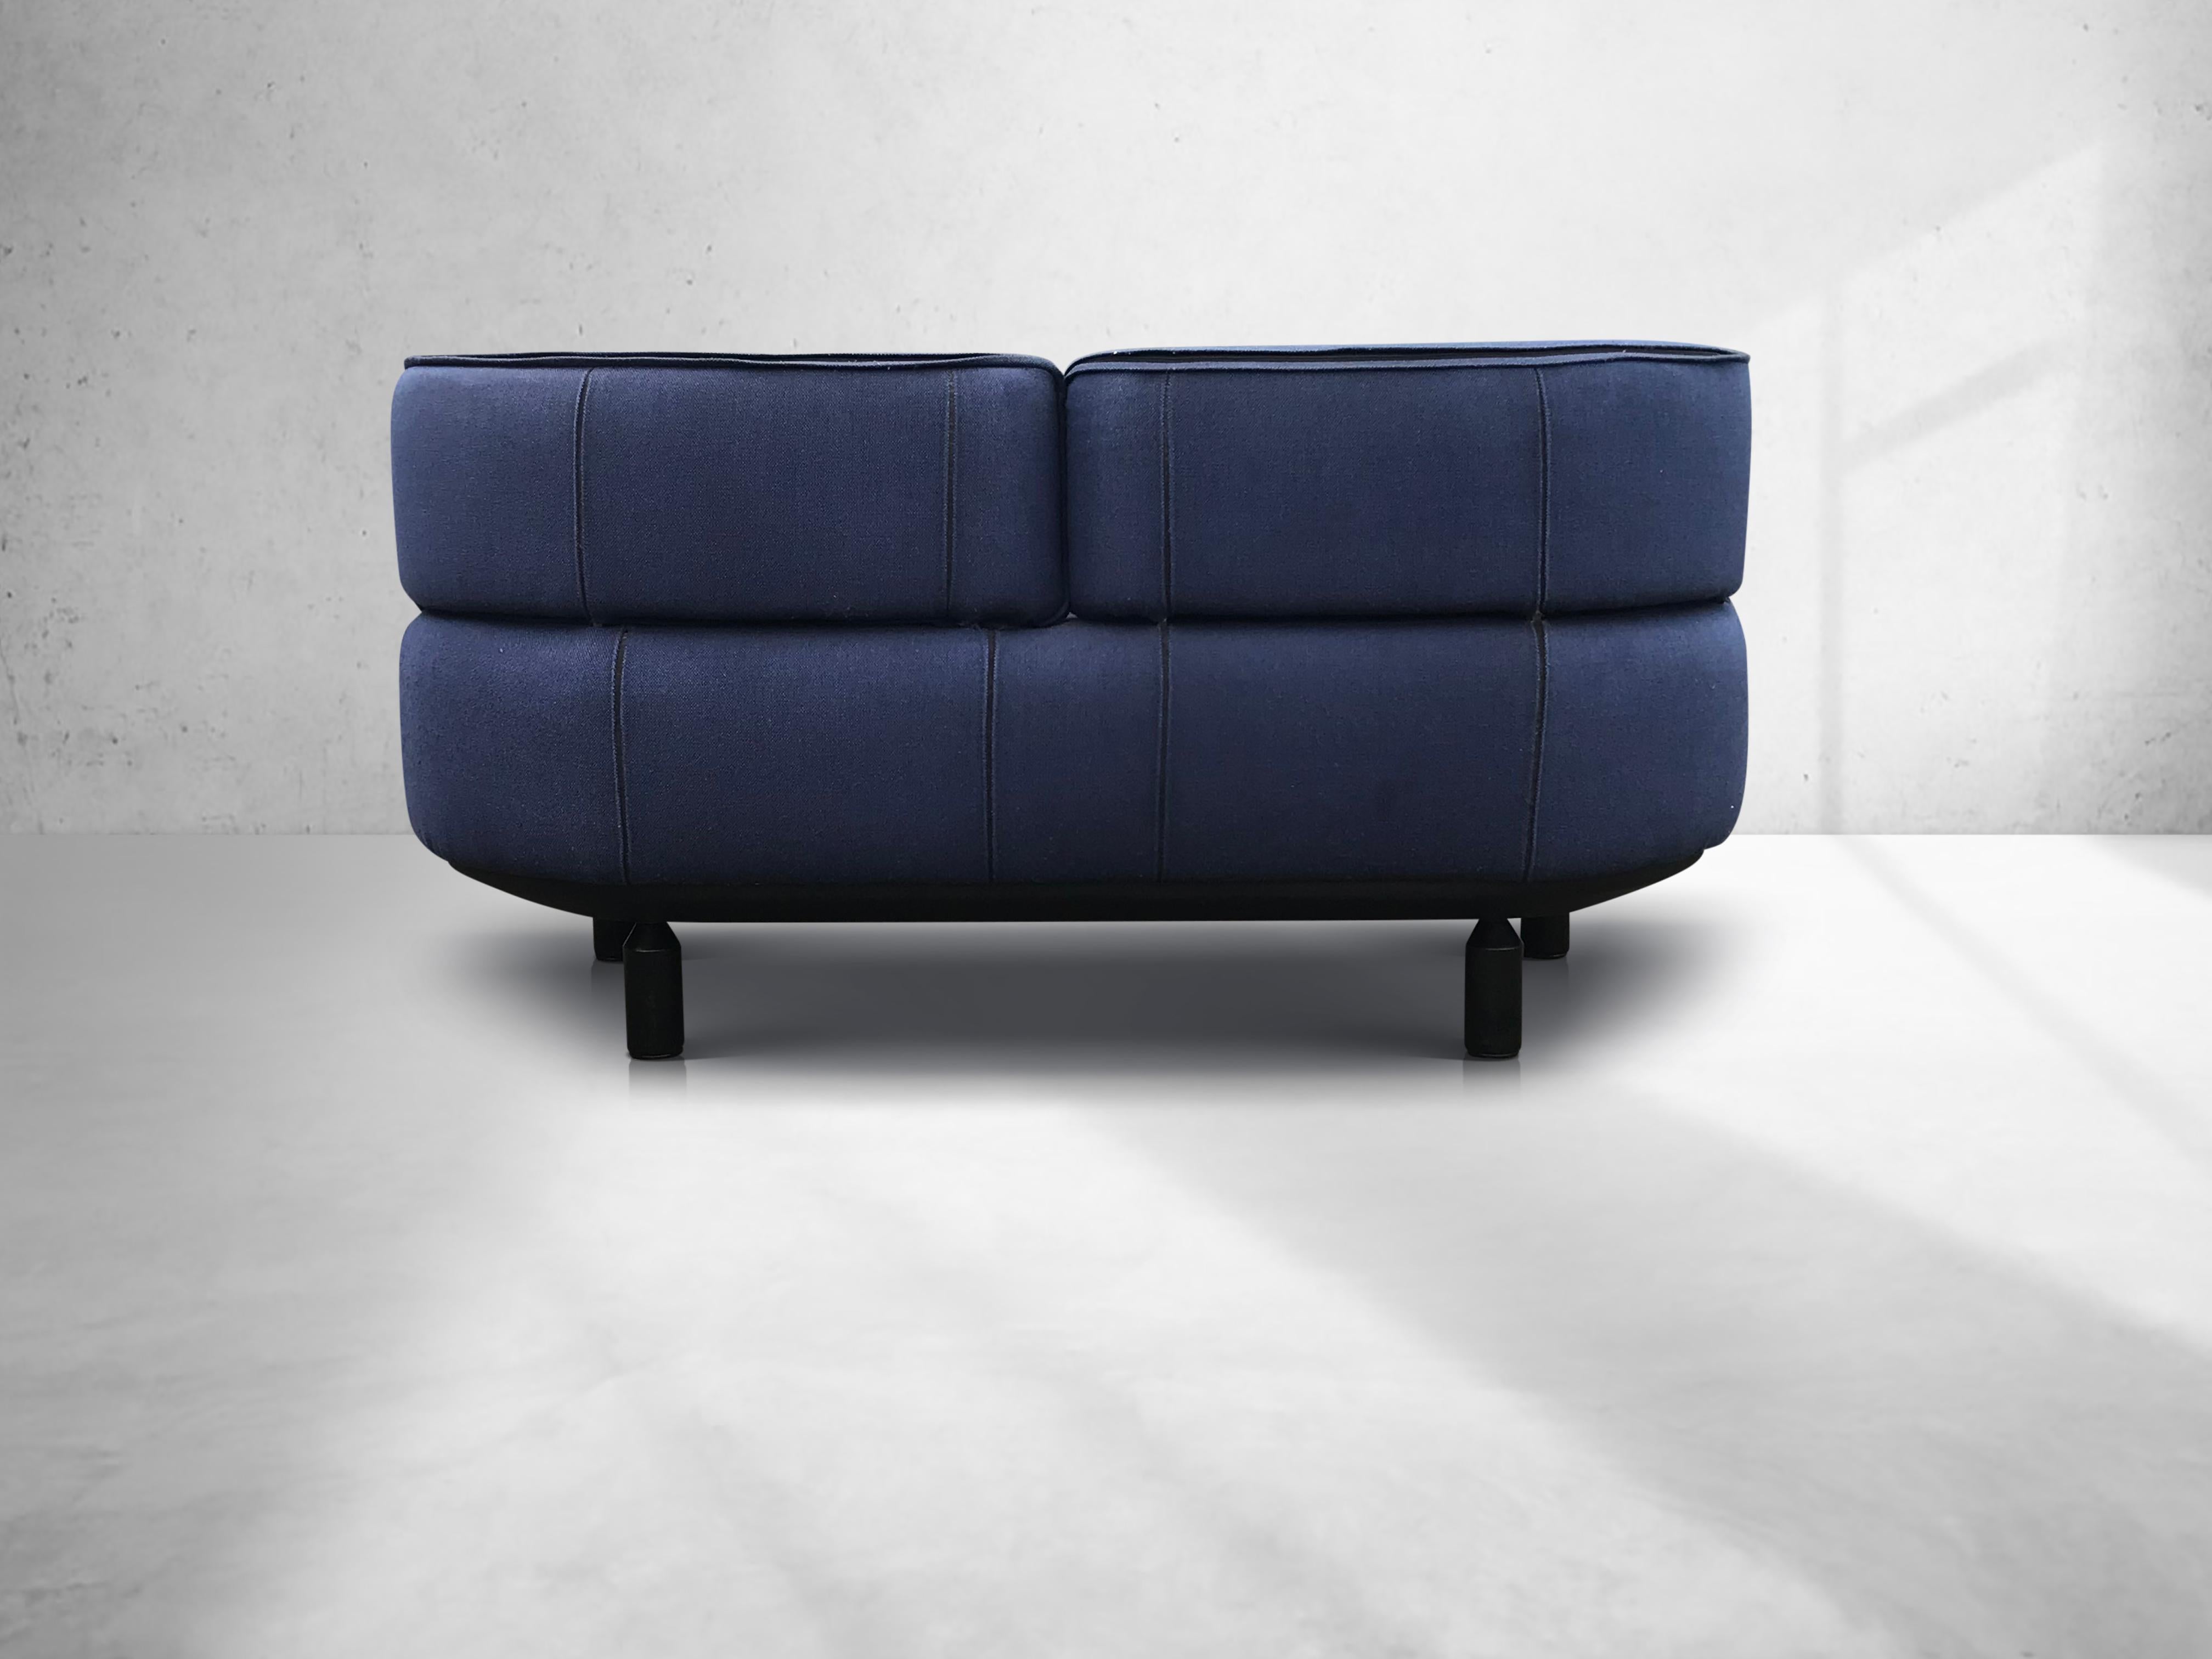 Late 20th Century Bull 2-seater sofa by Gianfranco Frattini for Cassina 1987